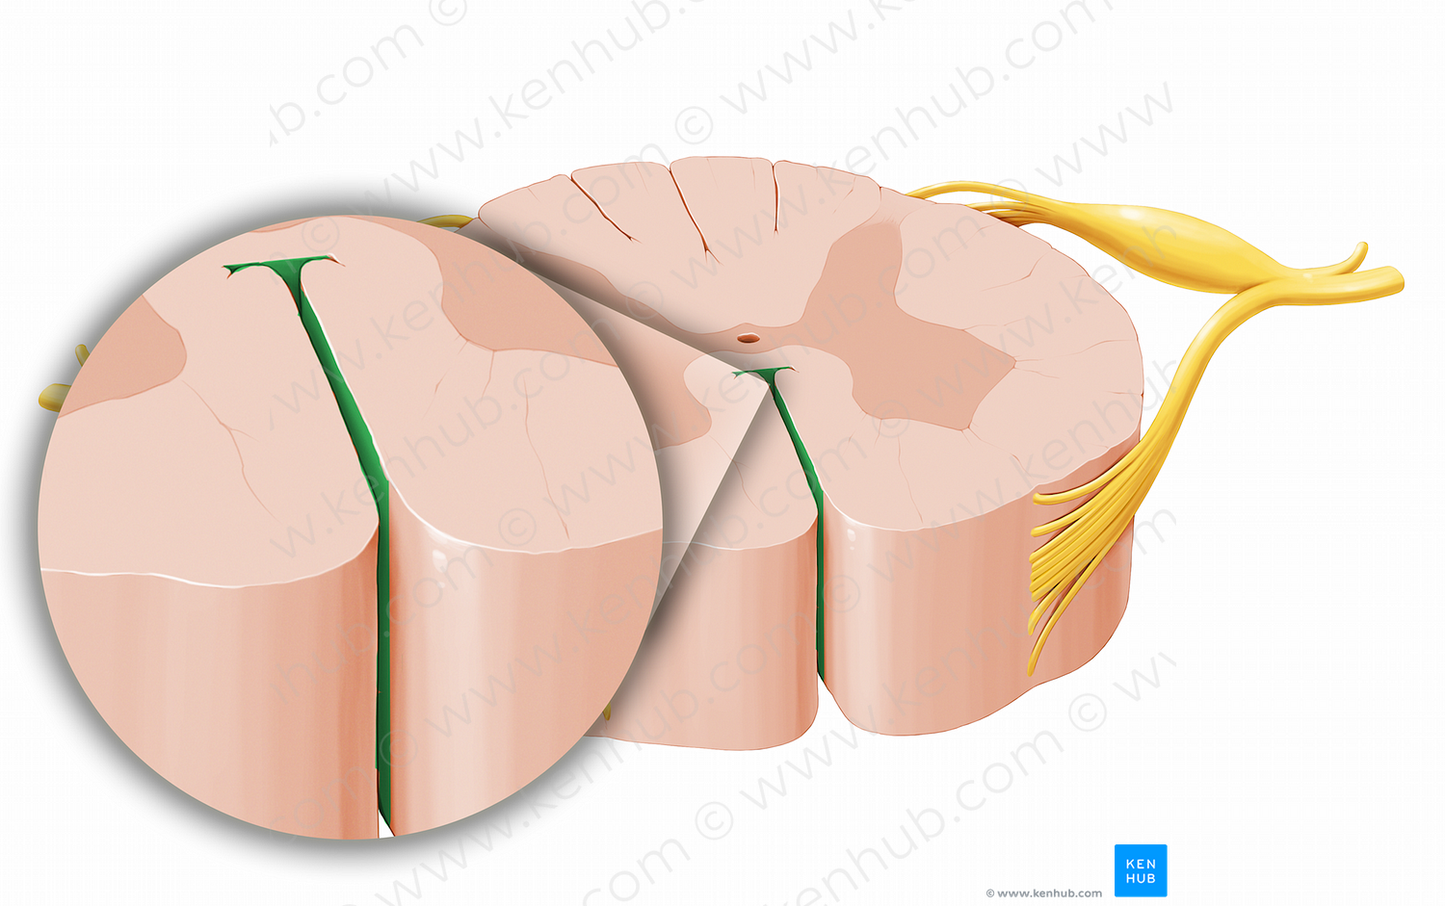 Anterior median fissure of spinal cord (#12026)